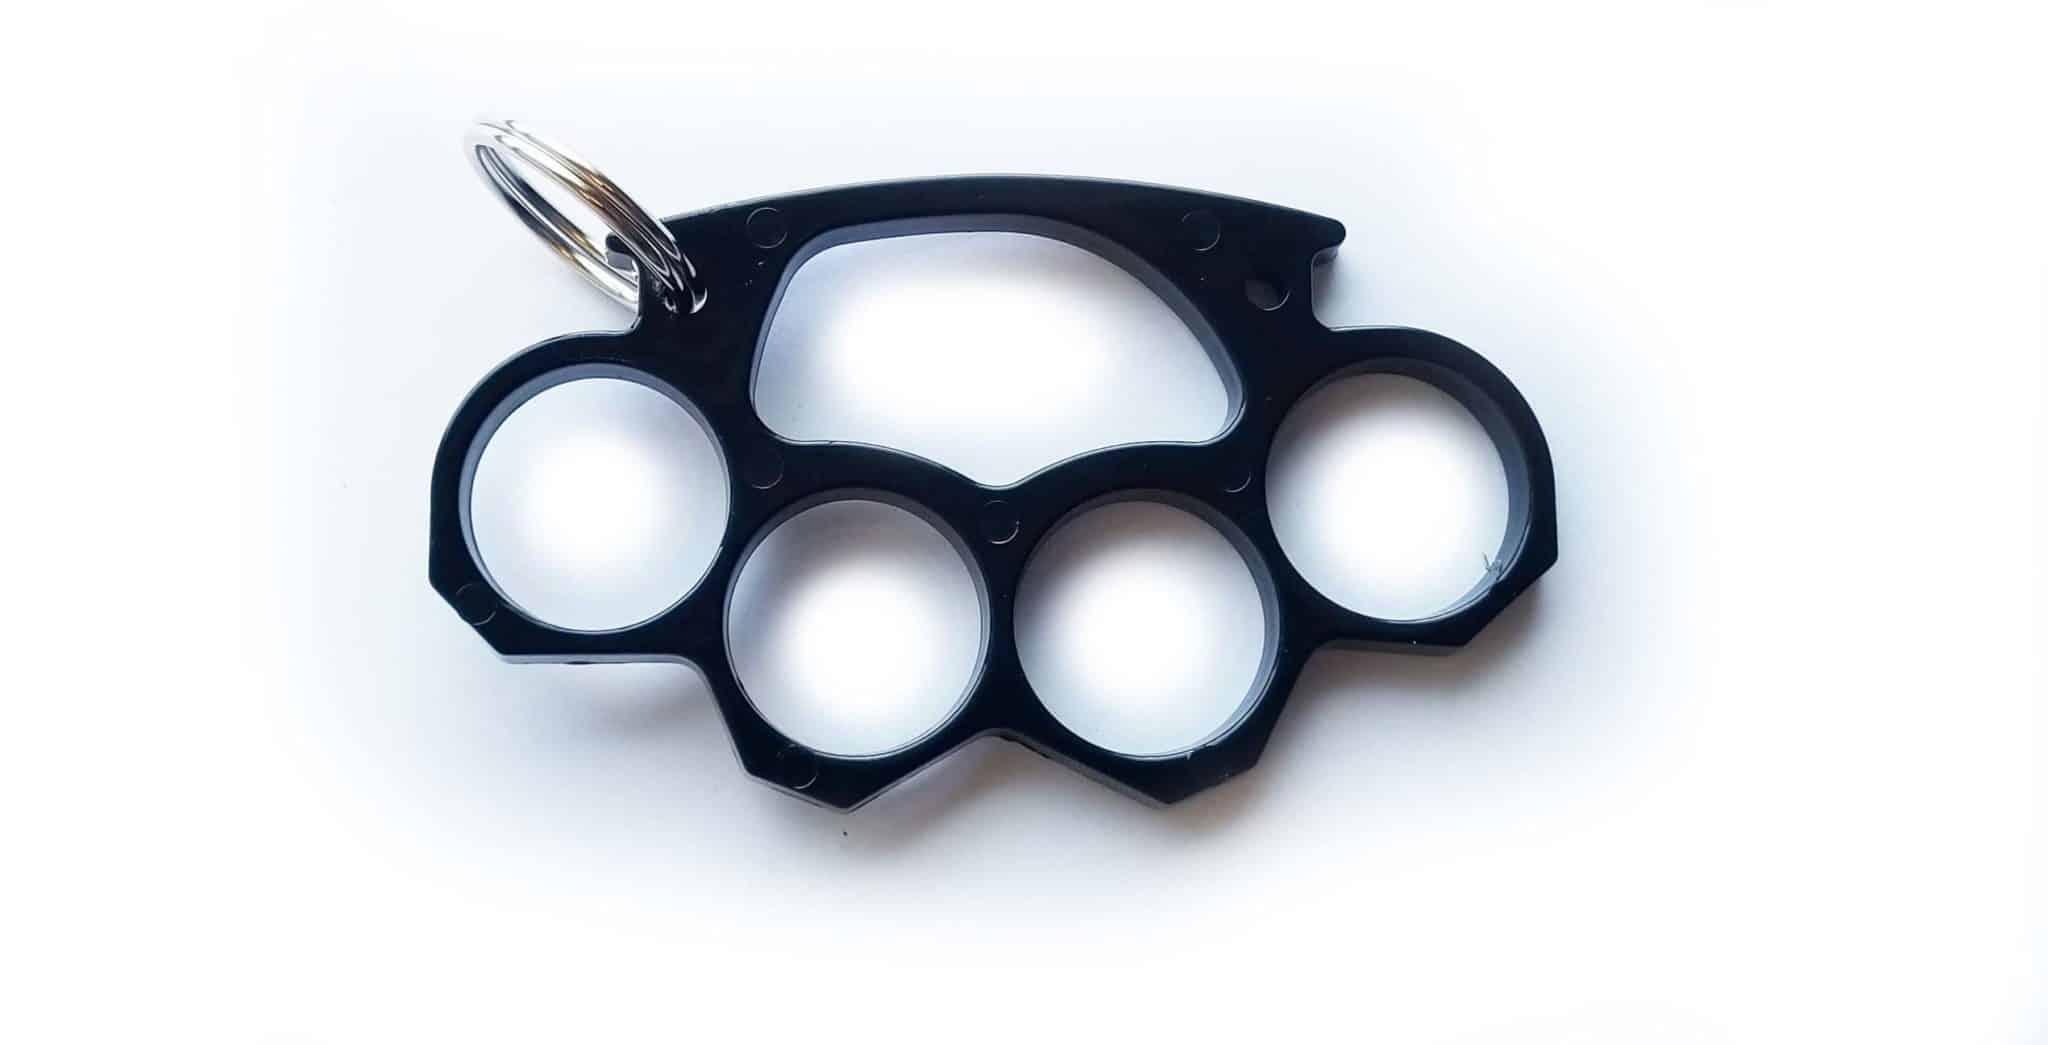 Sleek Knuckles In White  Brass Knuckles That Are Legal In Canada!